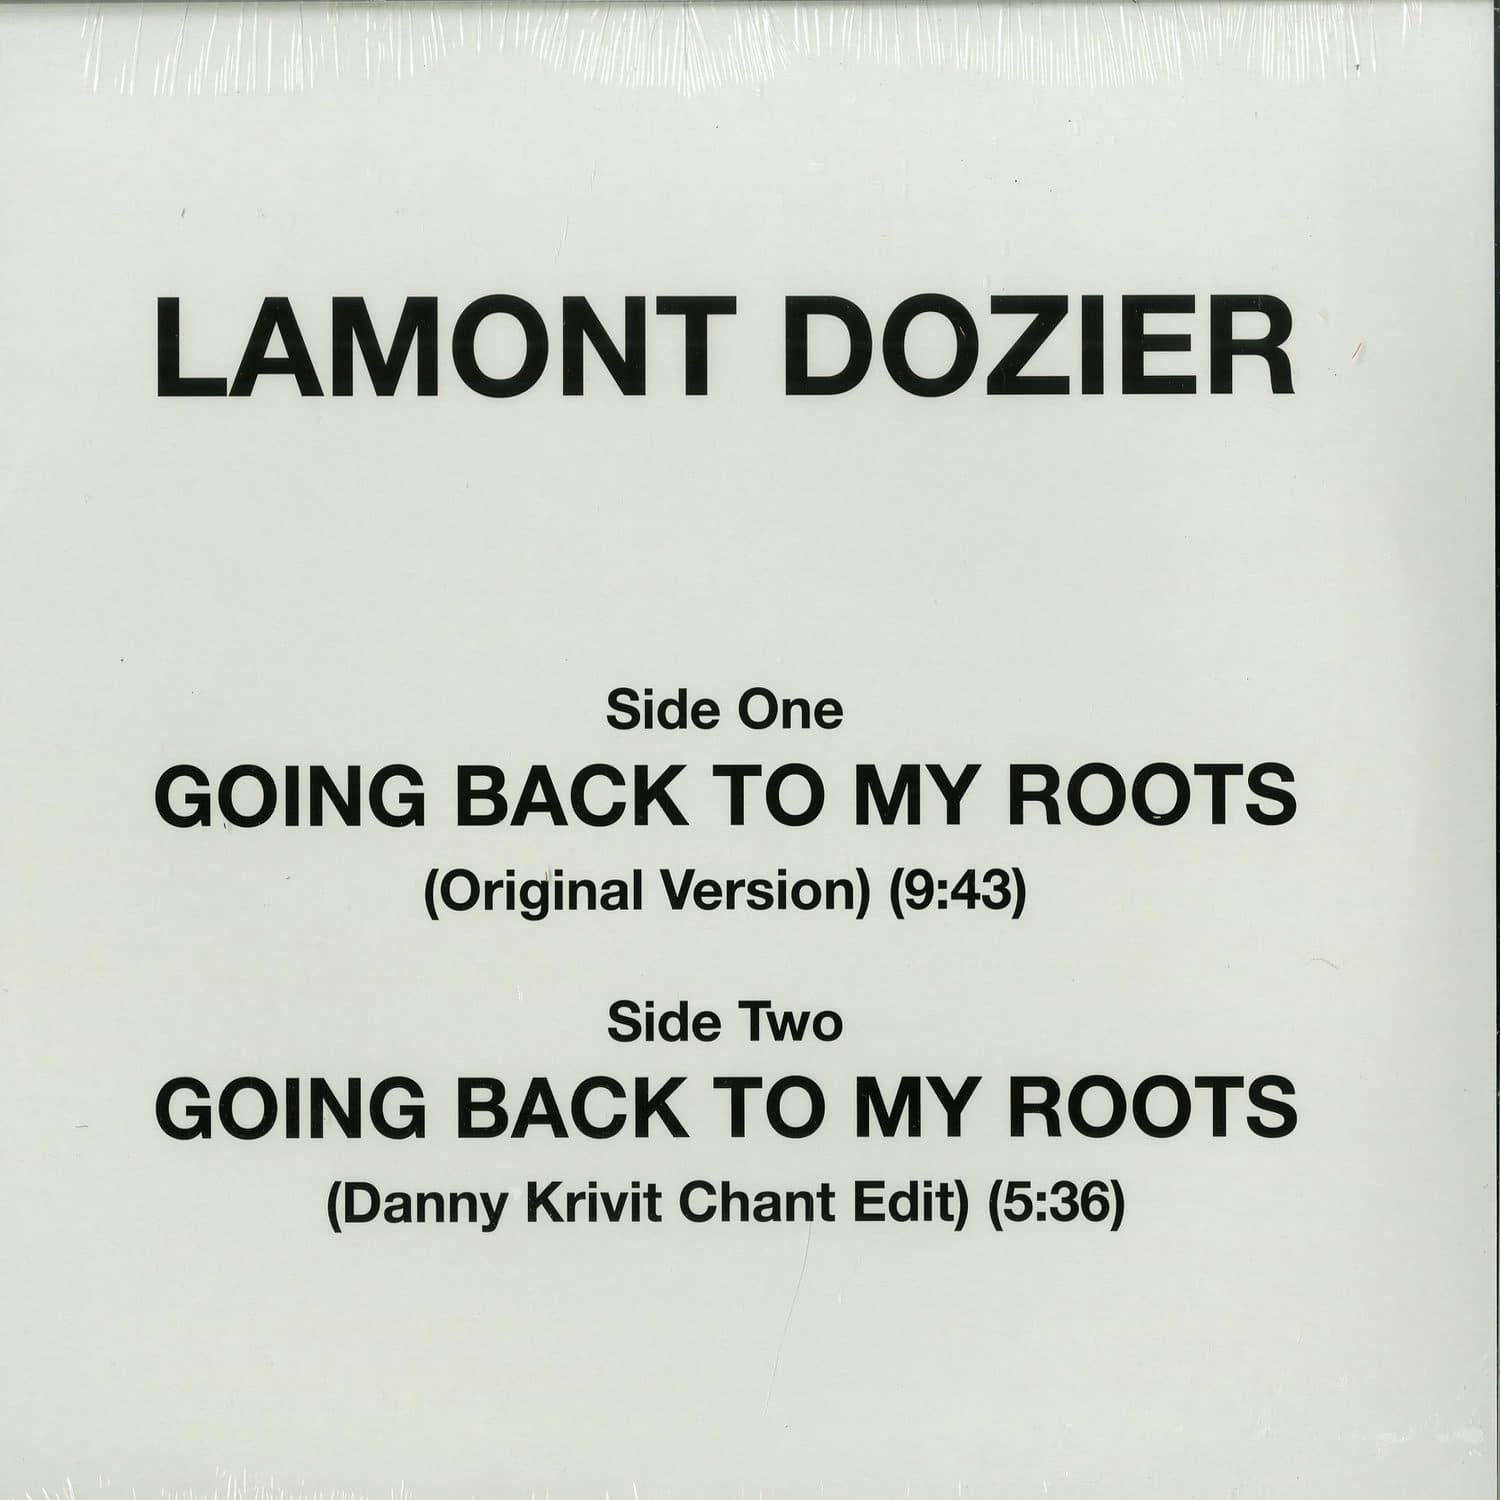 Lamont Dozier - GOING BACK TO MY ROOTS